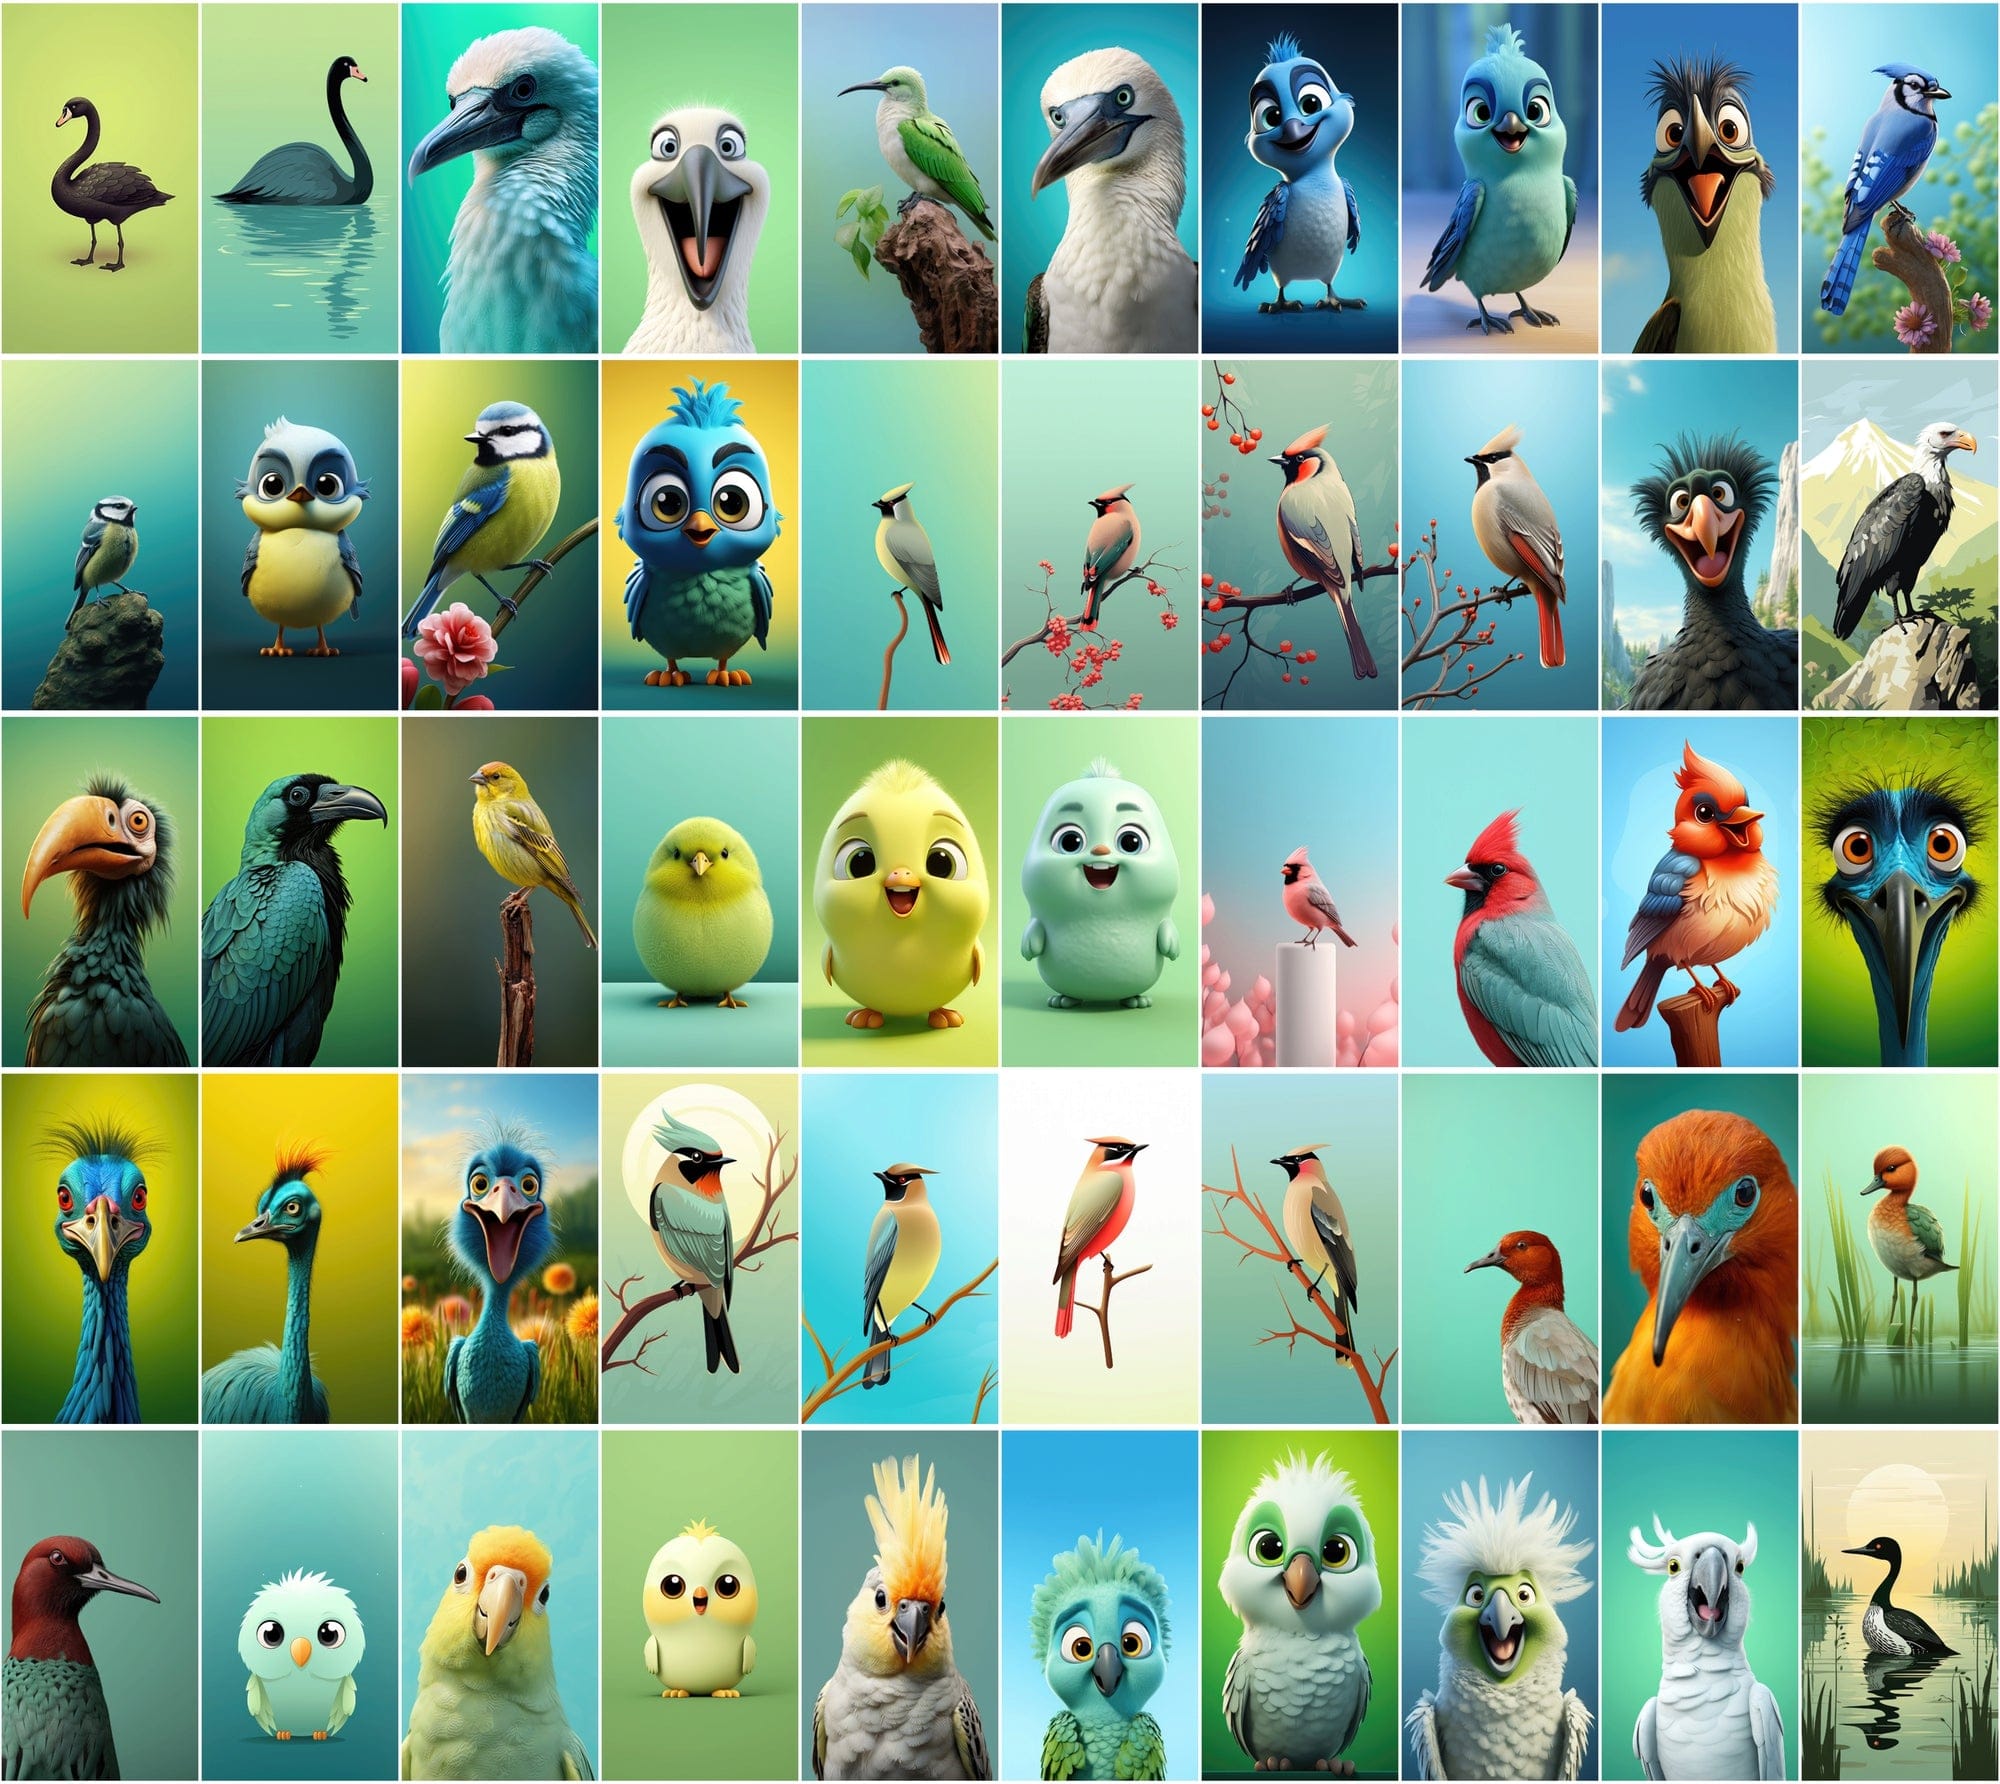 Exquisite Bird Image Collection - 600 JPEGs with Commercial License, Diverse Styles Digital Download Sumobundle